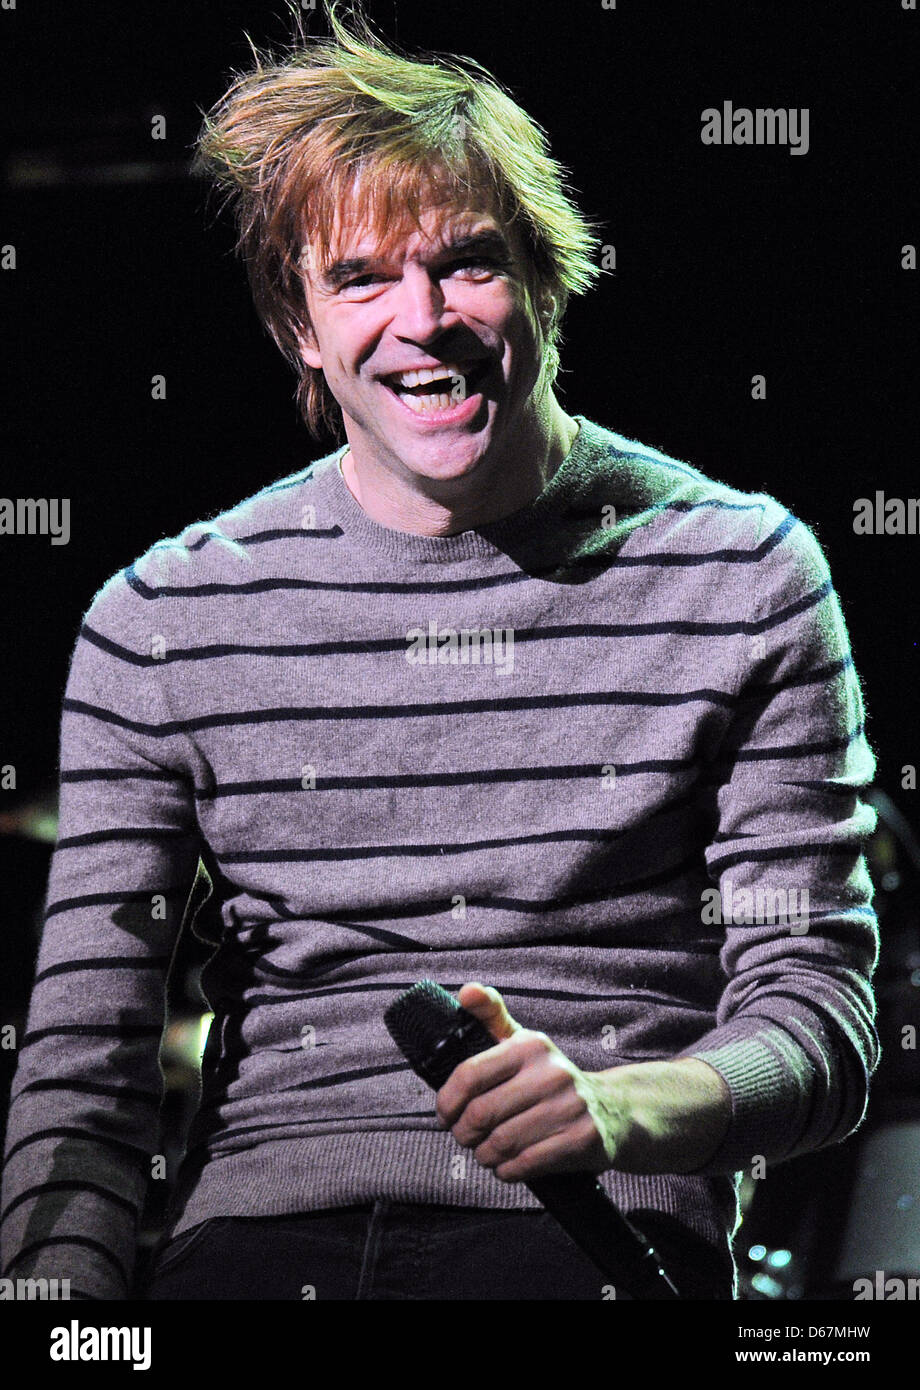 German punk band 'Die Toten Hosen' with singer Campino perform on stage in  Duesseldorf, Germany, 23 June 2012. One day after Cmpino's 50th birthday,  the band played an unplugged concert at Tonholle.